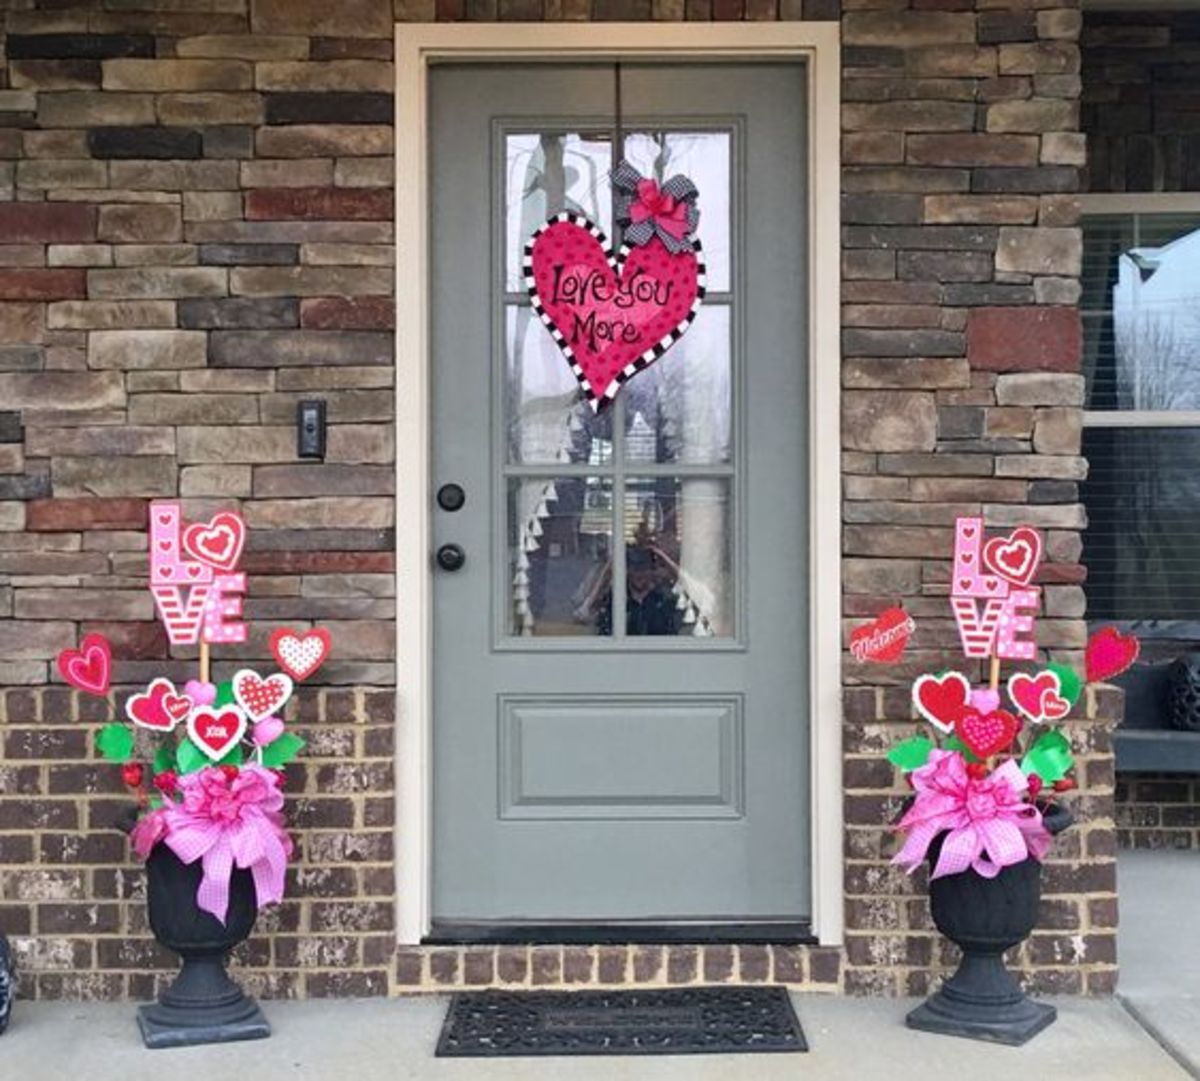 3 easy Valentine's Day outdoor decor ideas for your porch and window box!